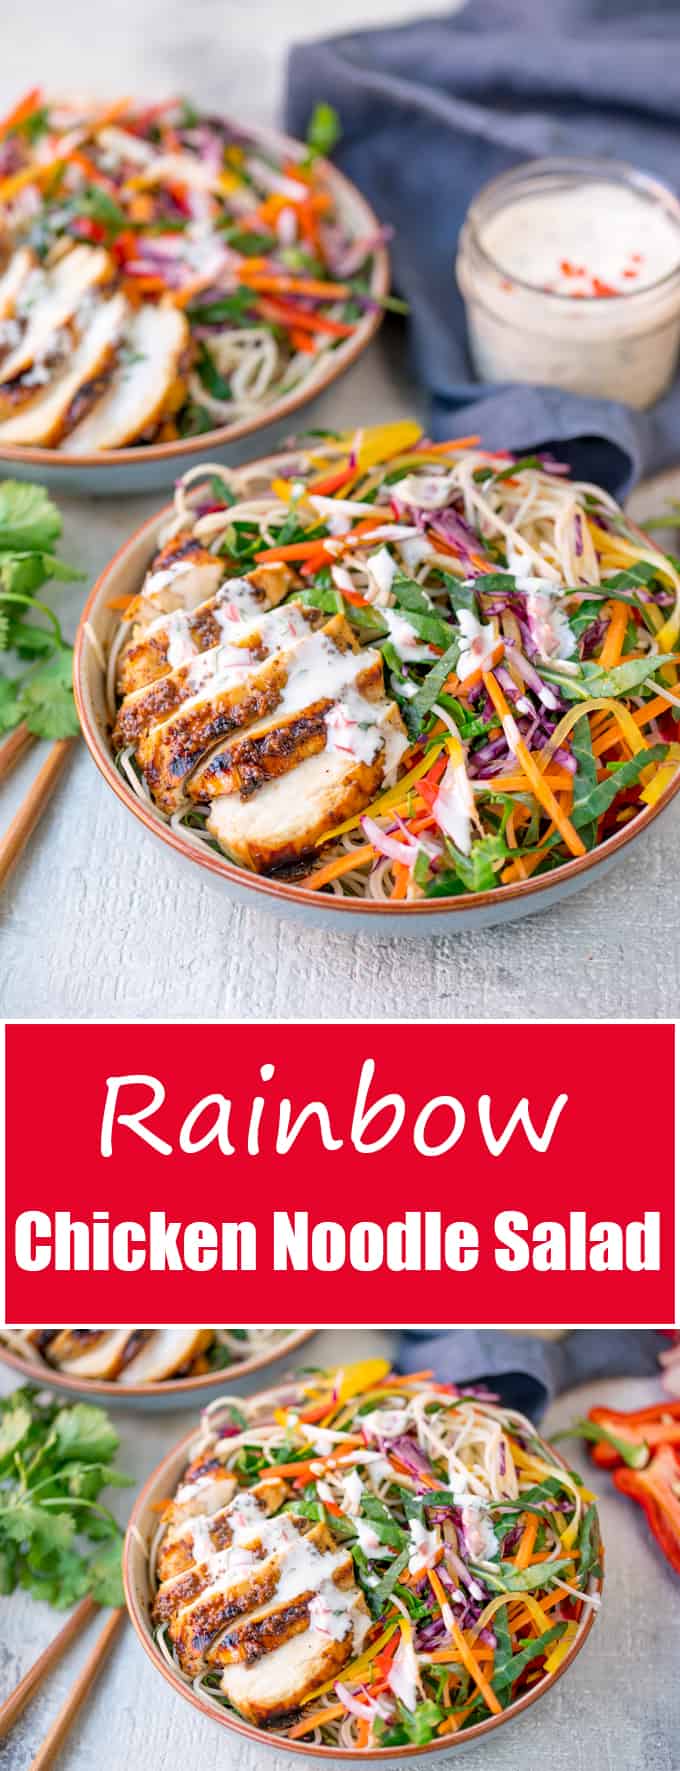 This Chicken Noodle Rainbow Salad with Chilli Lime Dressing is packed with nutritious ingredients. Totally delicious and satisfying!